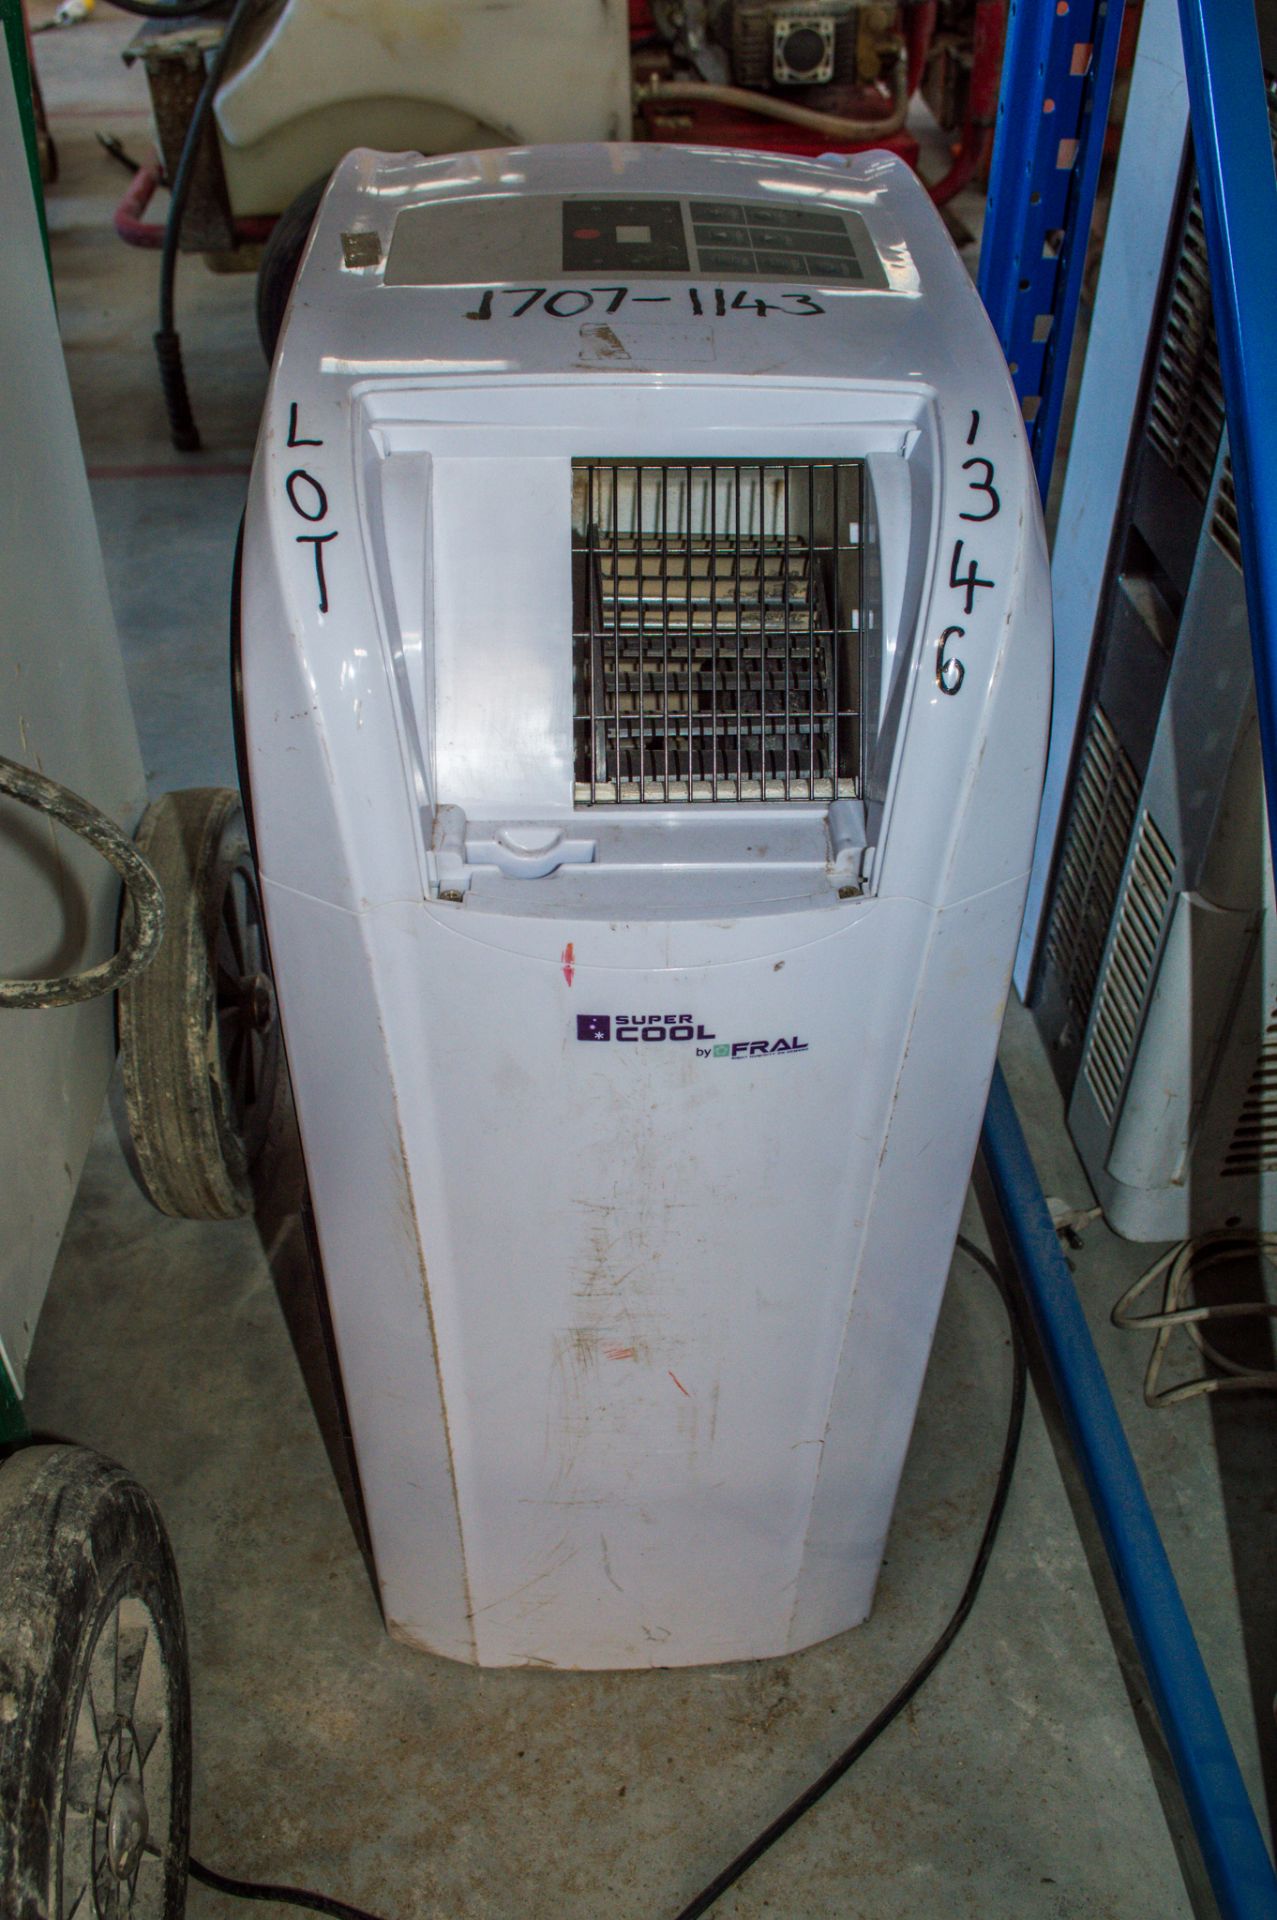 Fral Super Cool 240v air conditioning unit 17071143 ** Direction grill missing & plug cut off **